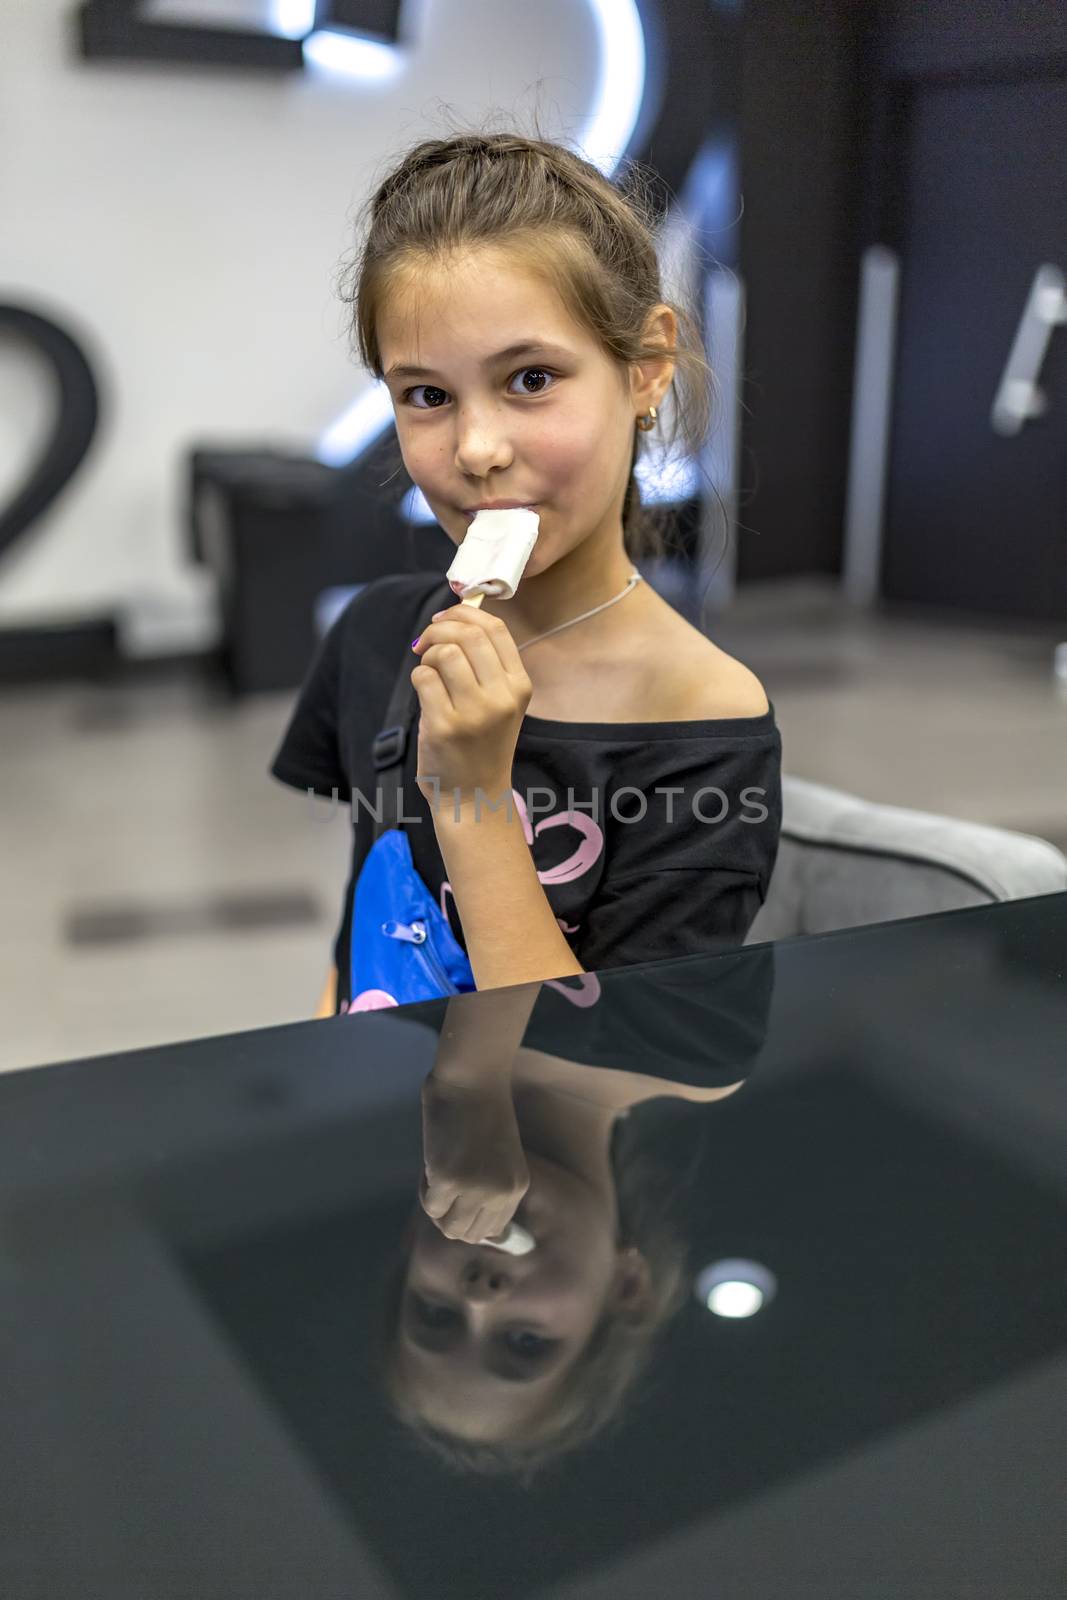 02.09.2019 Kiev, Ukraine. Beautiful girl with big eyes eating ice cream, she is reflected in a black shiny table